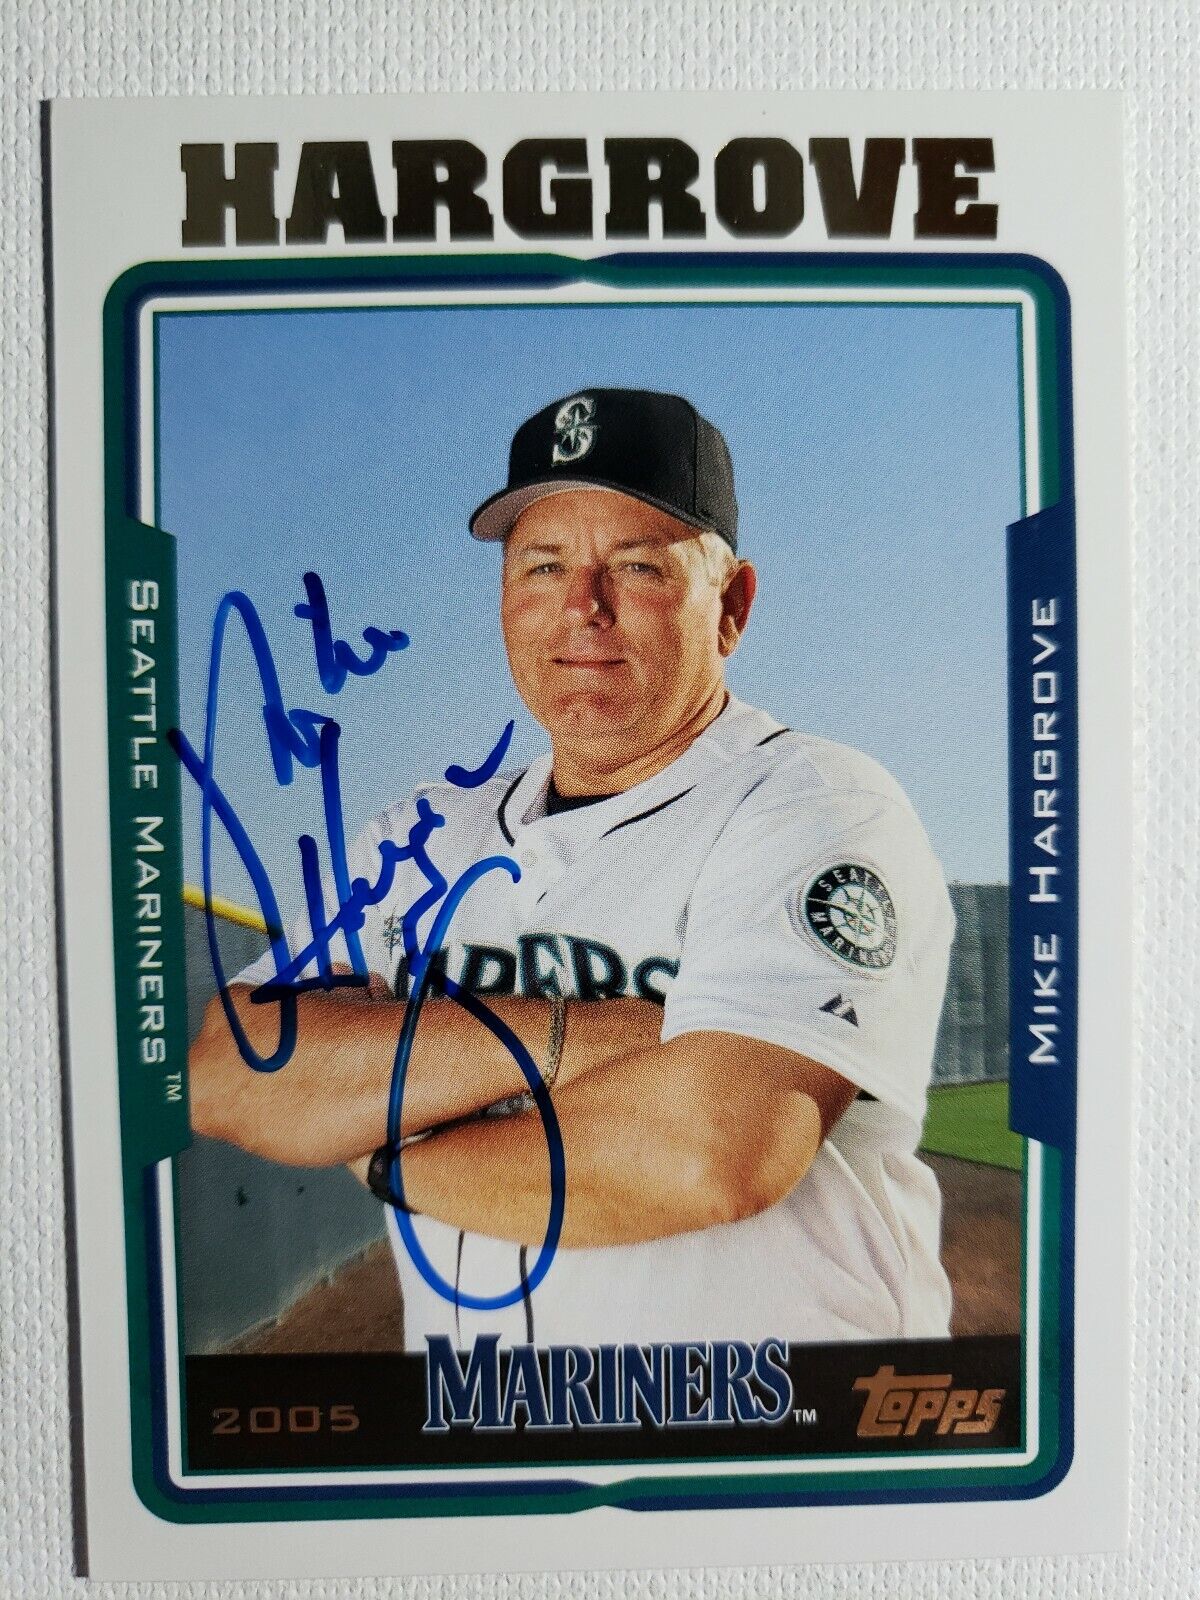 2005 Topps Update Mike Hargrove Auto Autograph Signed Mariners Indians Card UH85